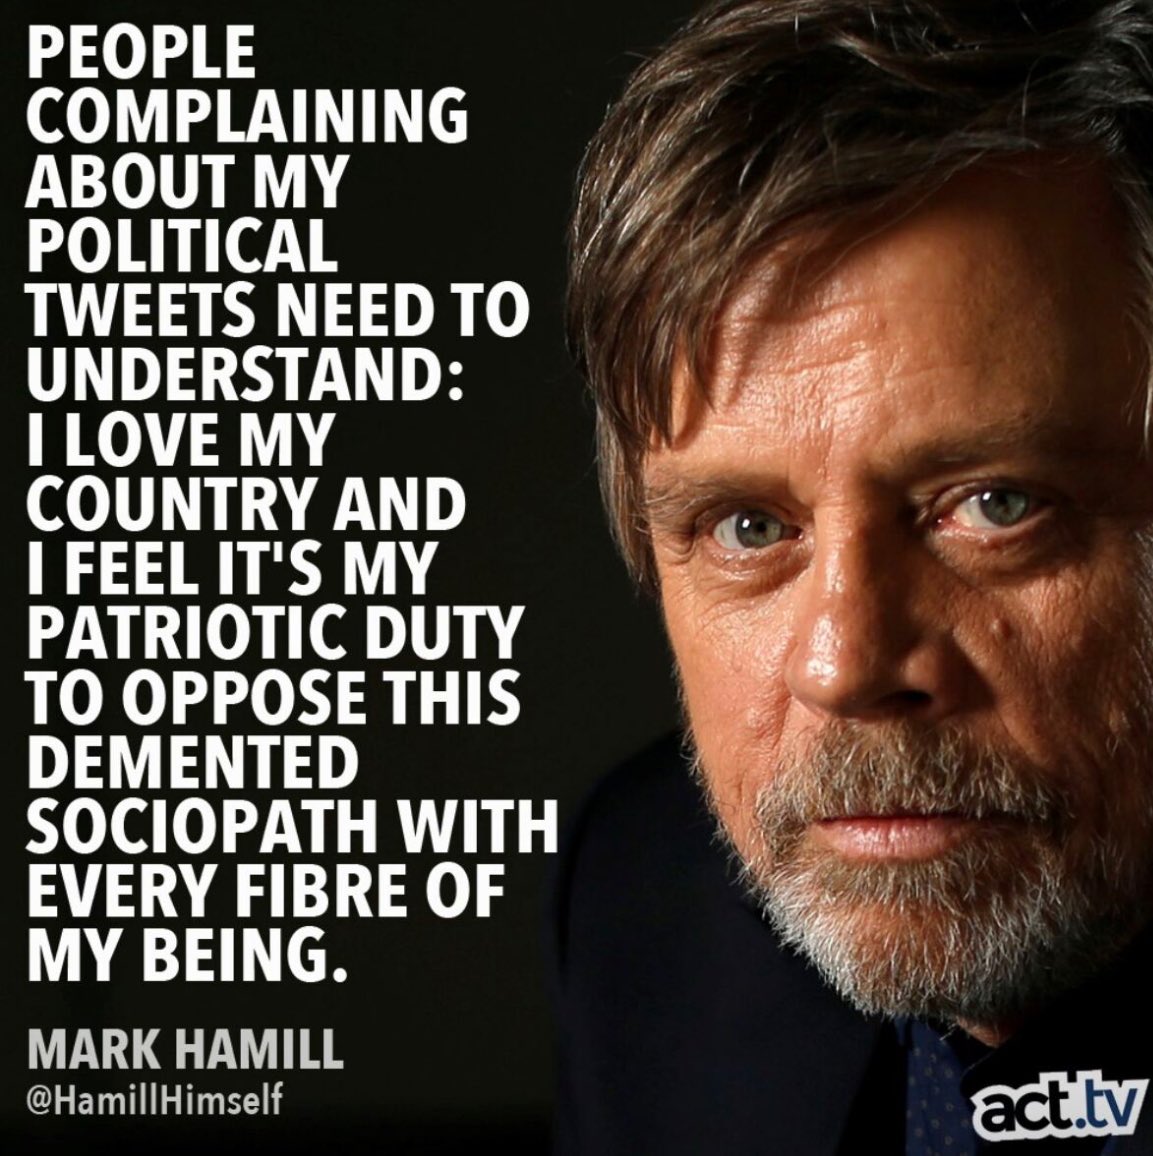 Jedi sh*t @MarkHamill we’re with you.